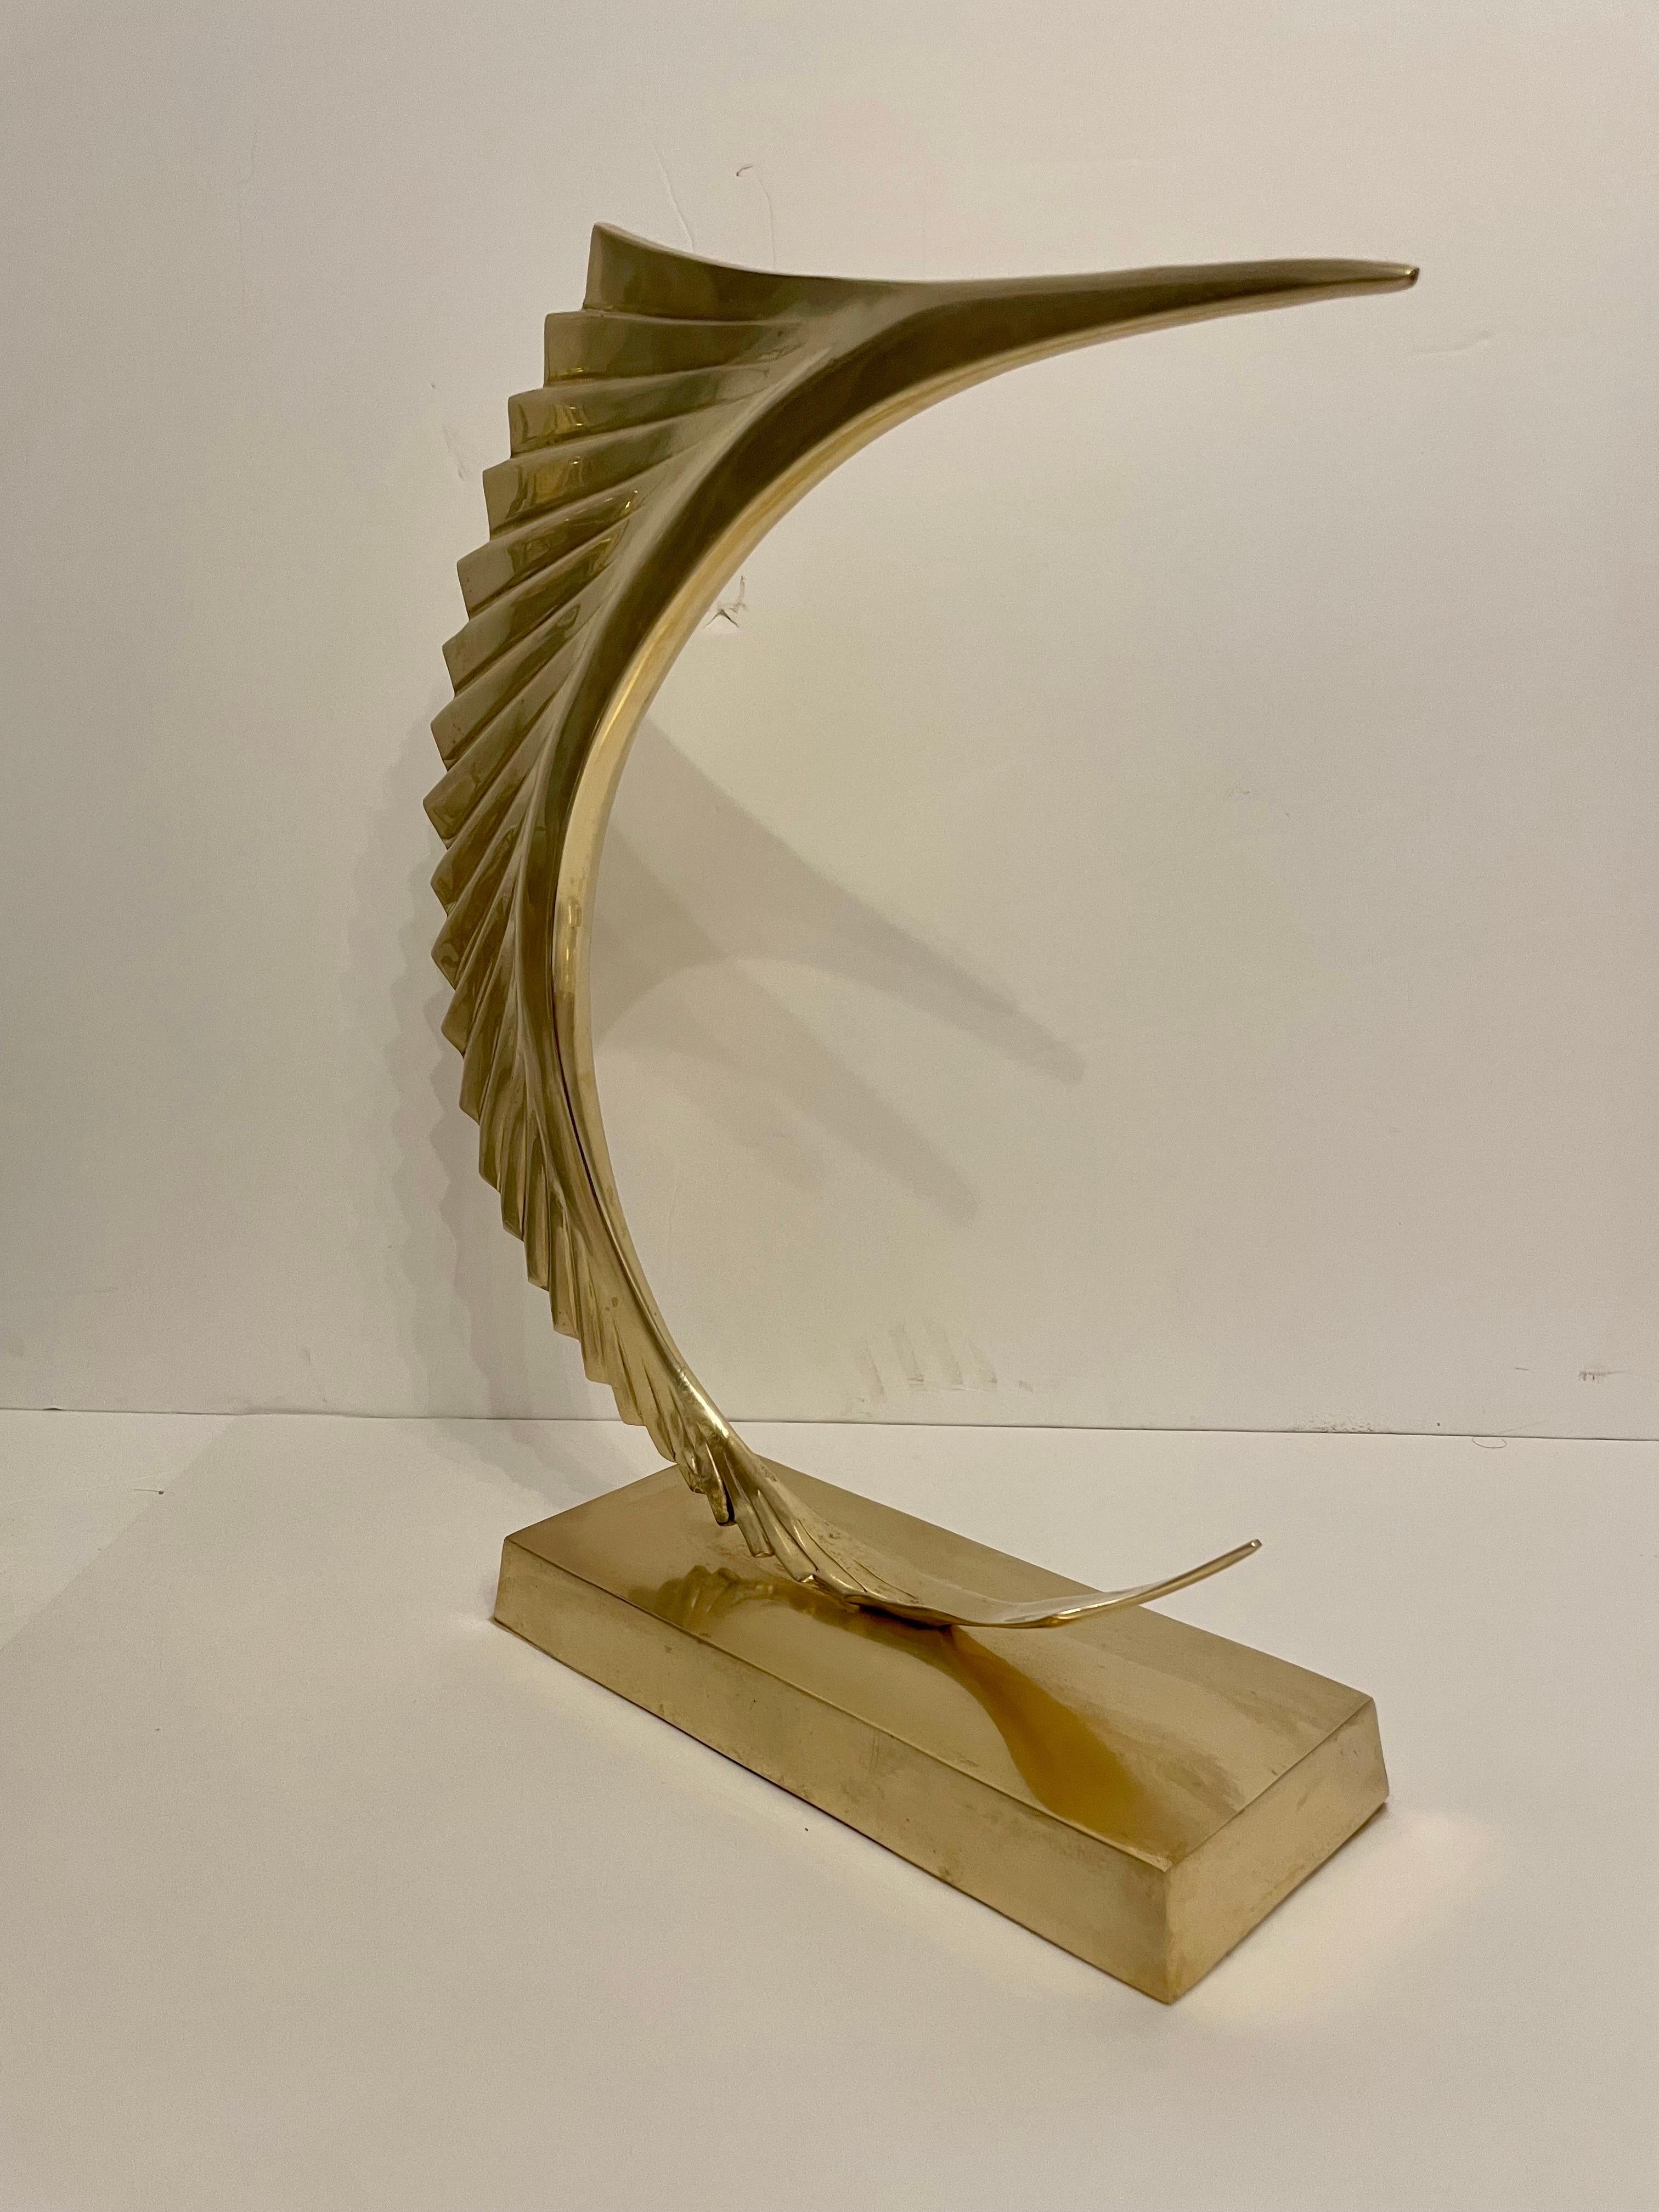 Brass Marlin Sailfish Sculpture In Good Condition For Sale In New York, NY